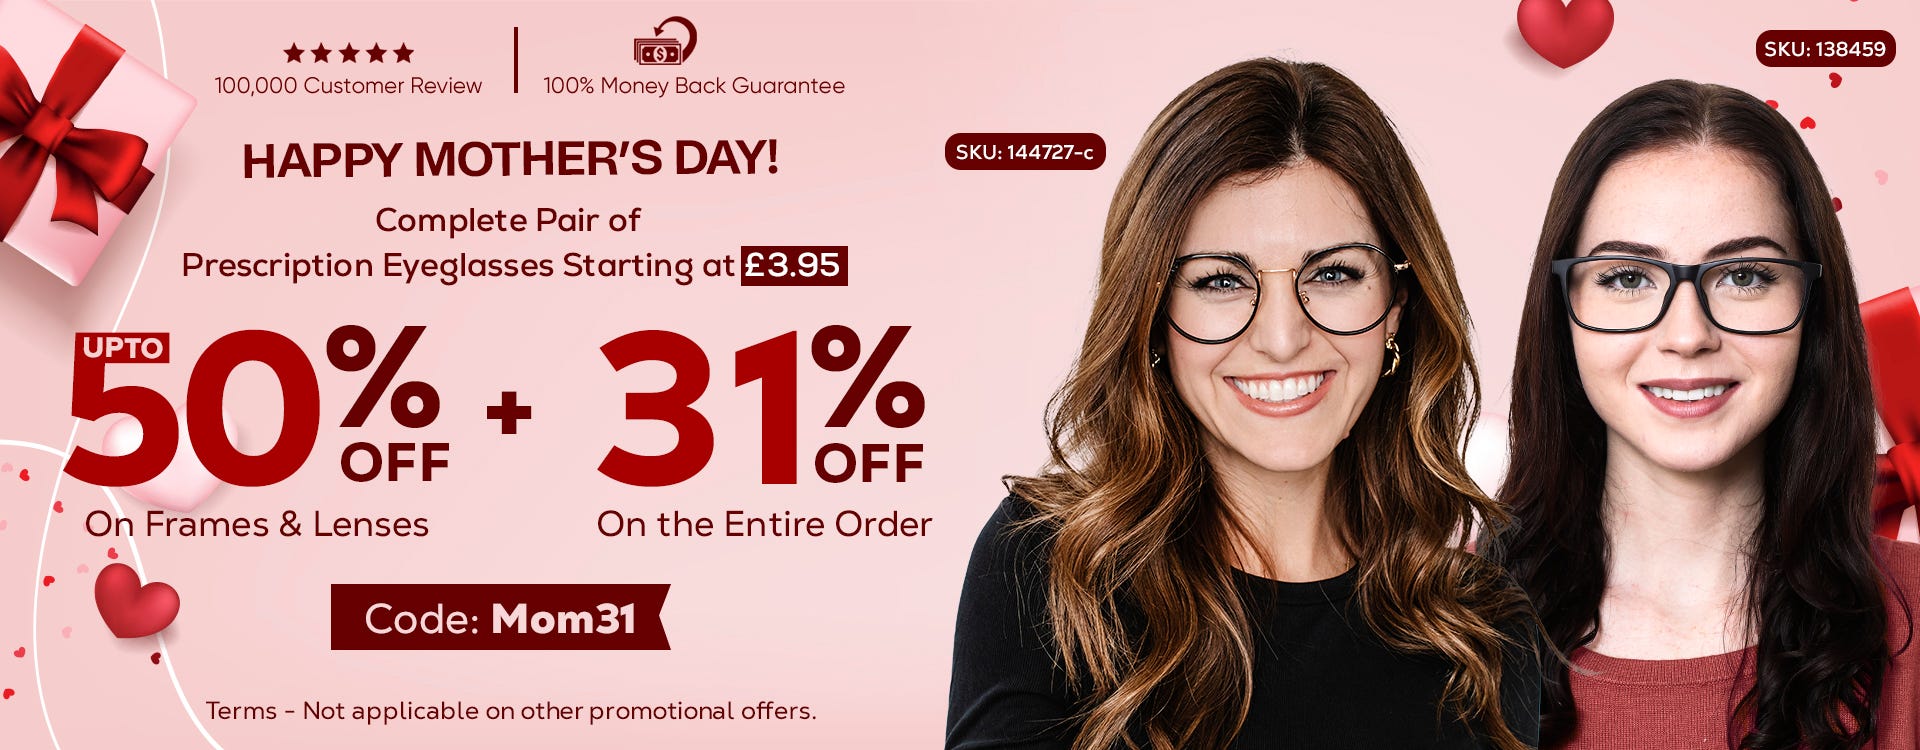 Upto 50% Discount On Frames & Lenses Extra 31% OFF On The Entire Order CODE: MOM31